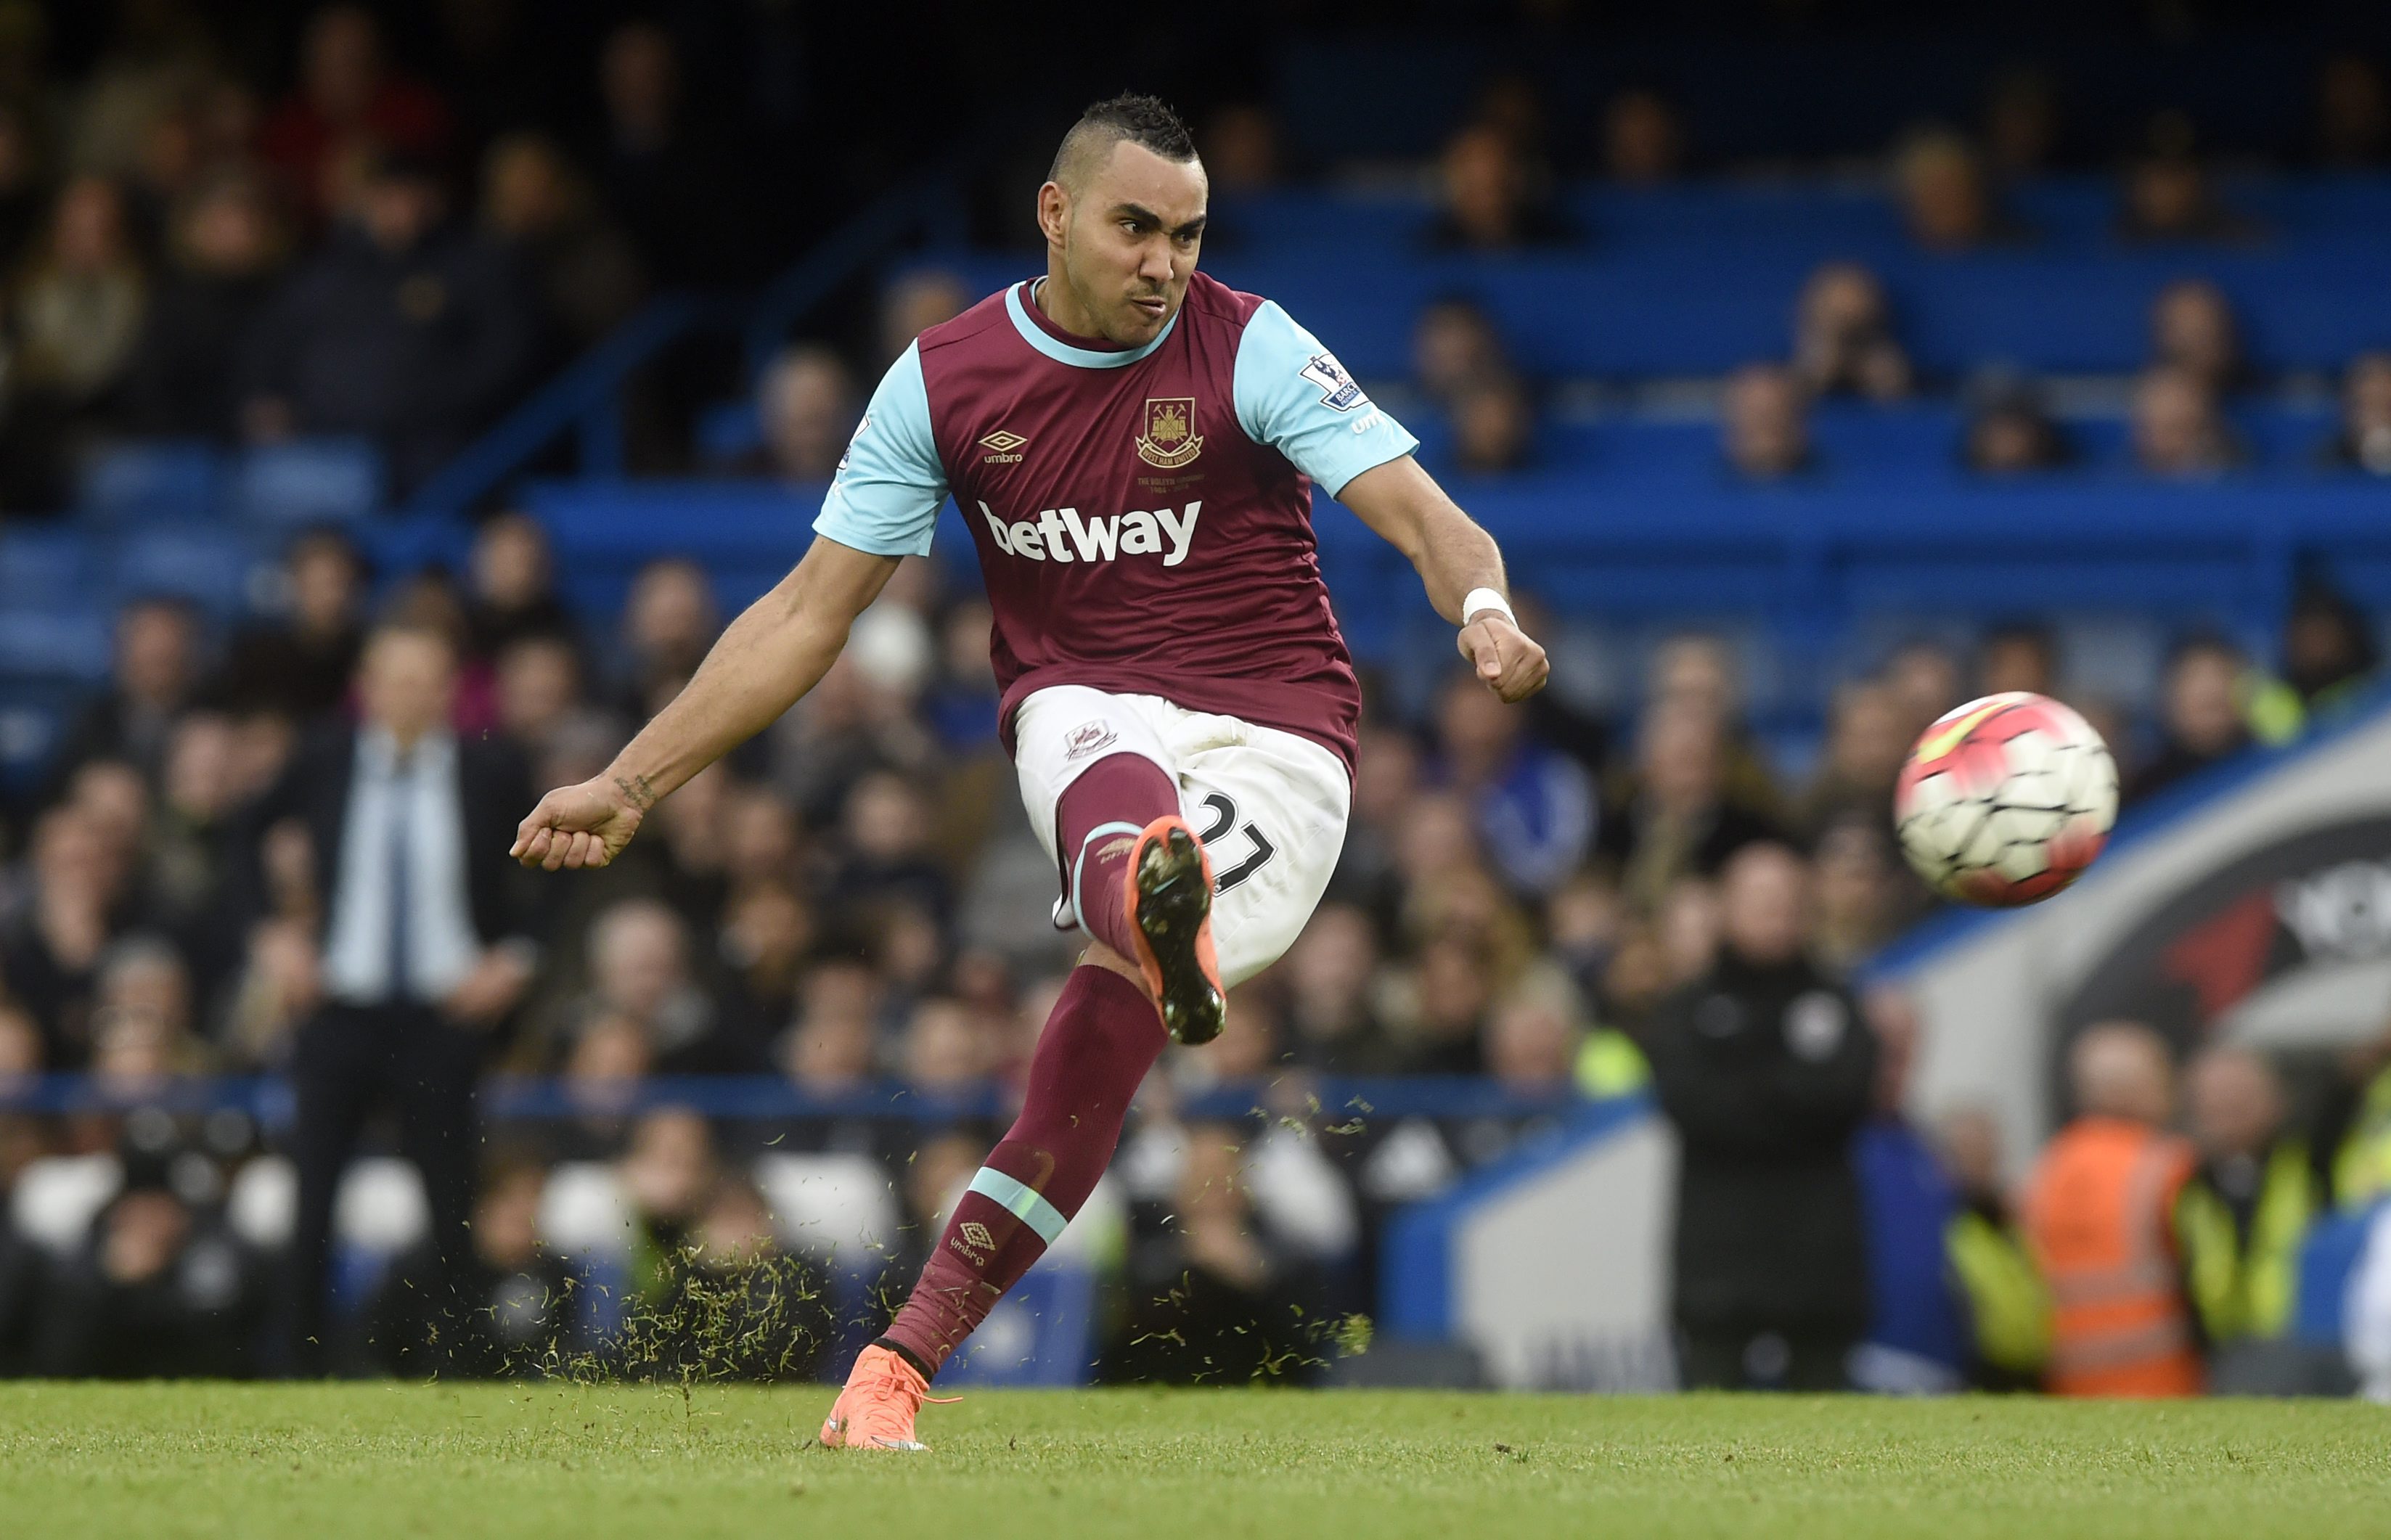 epa05220842 West Ham United's Dimitri Payet takes a free kick during the English Premier League match between Chelsea and West Ham United at Stamford Bridge, London, Britain, 19 March 2016.  EPA/WILL OLIVER EDITORIAL USE ONLY. No use with unauthorized audio, video, data, fixture lists, club/league logos or 'live' services. Online in-match use limited to 75 images, no video emulation. No use in betting, games or single club/league/player publications.